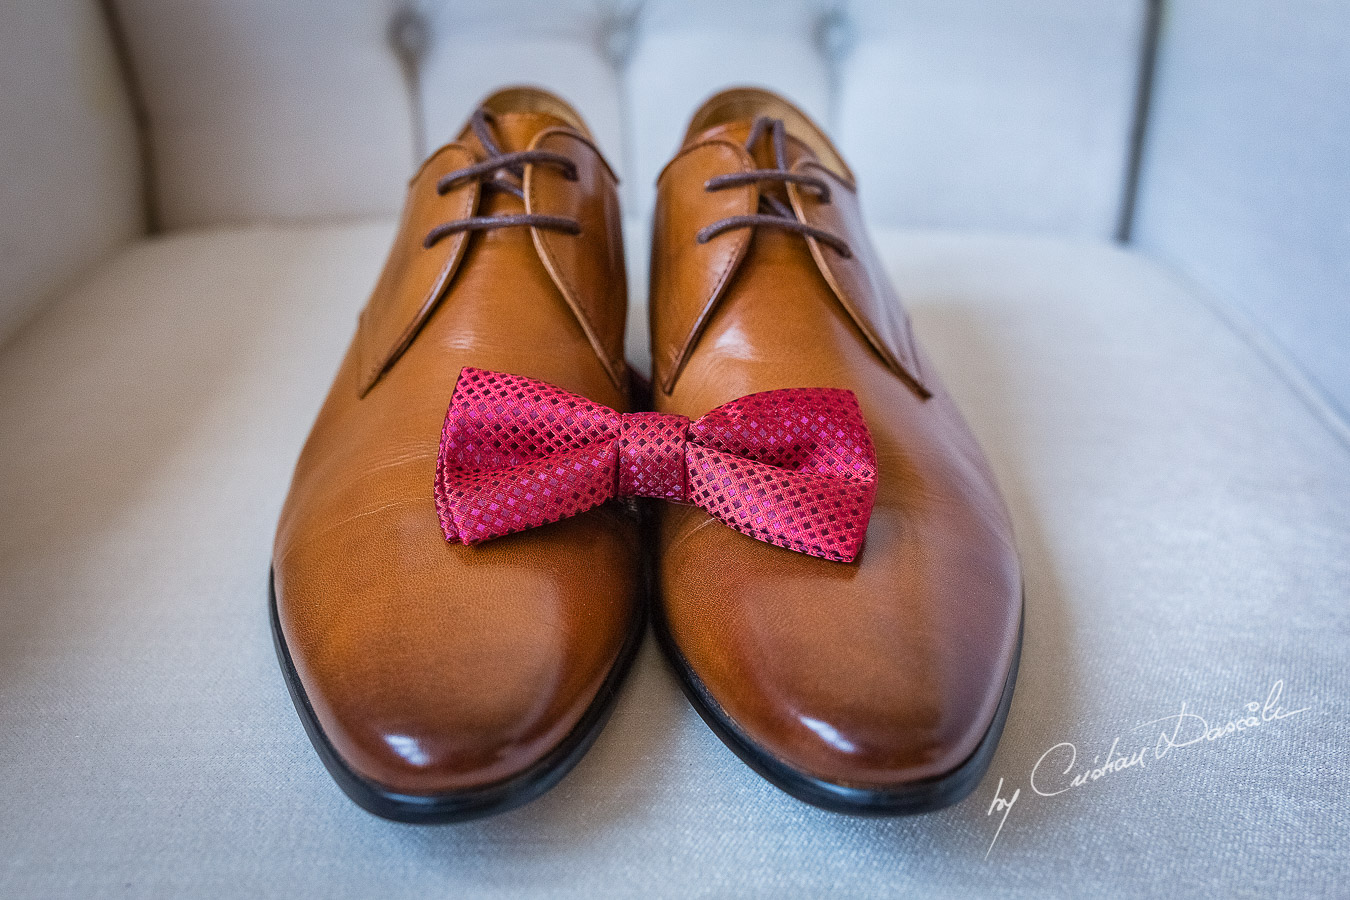 Groom's shoes and bow-tie photographed at a wedding in Nicosia by Cyprus Wedding Photographer Cristian Dascalu